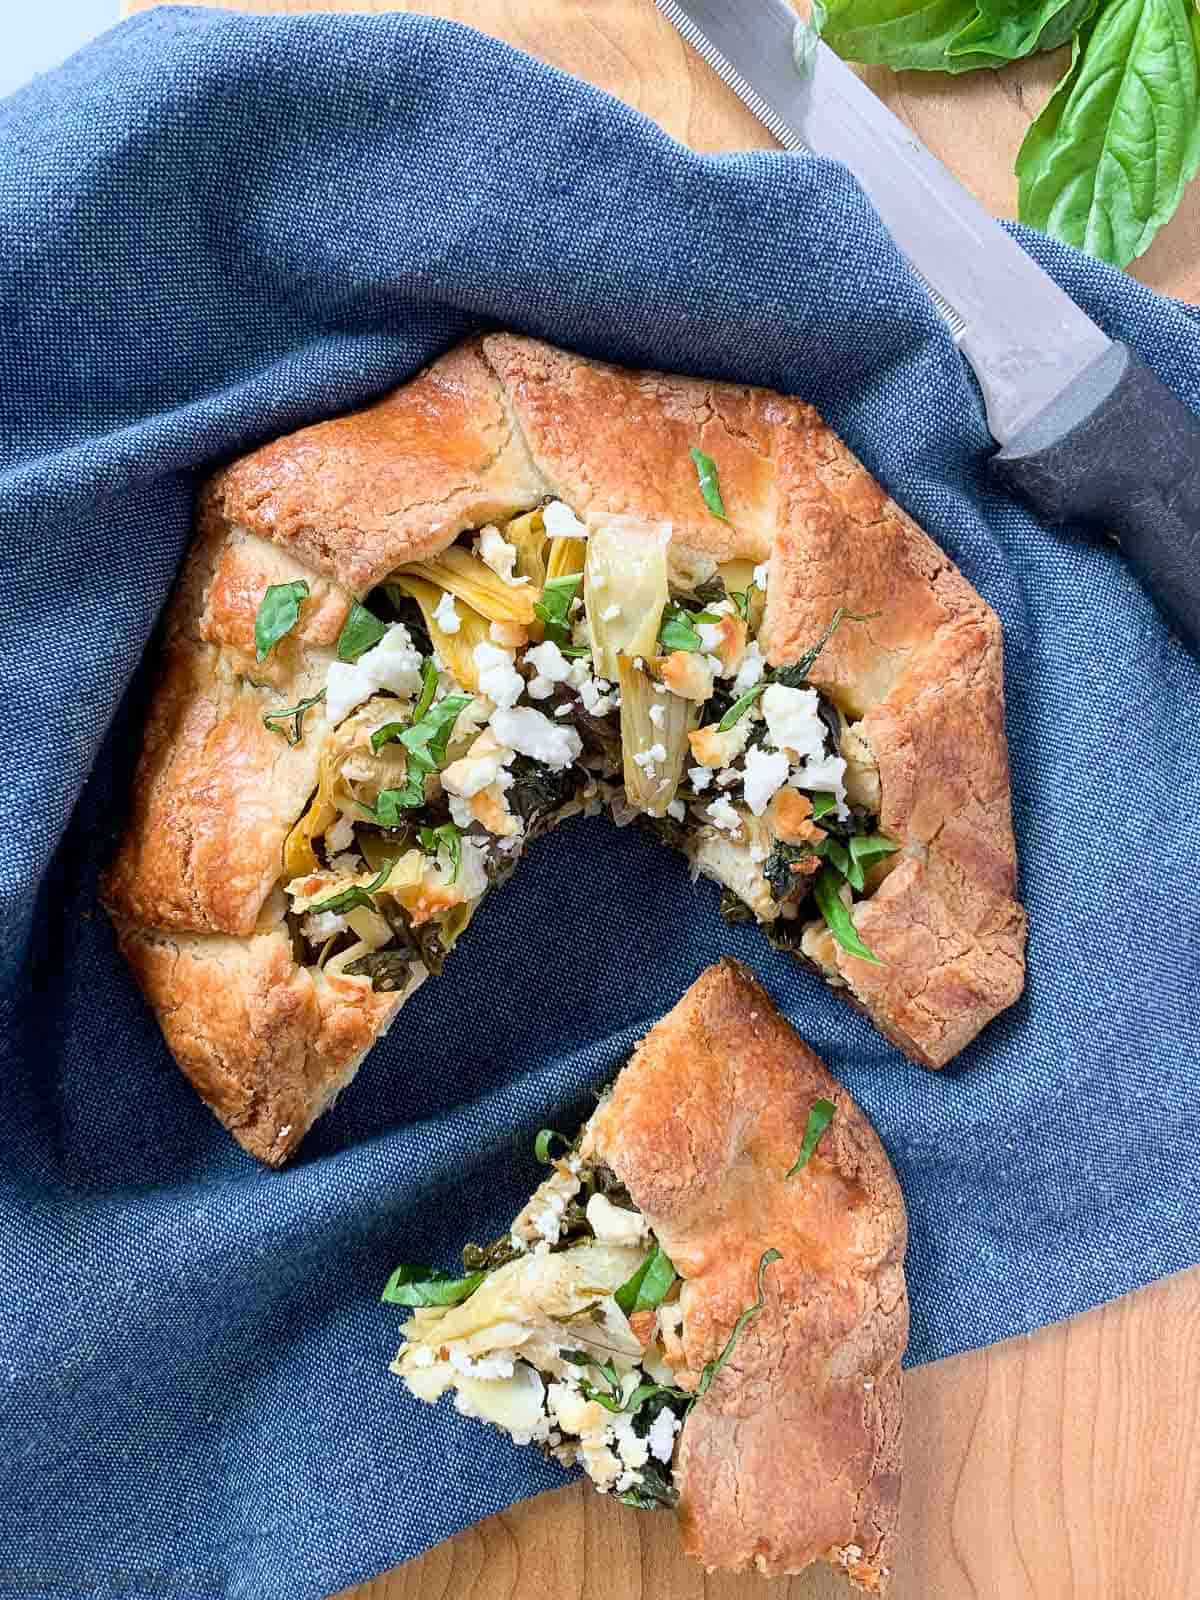 Gluten Free Spinach Artichoke Galette on a blue cloth with one wedge removed